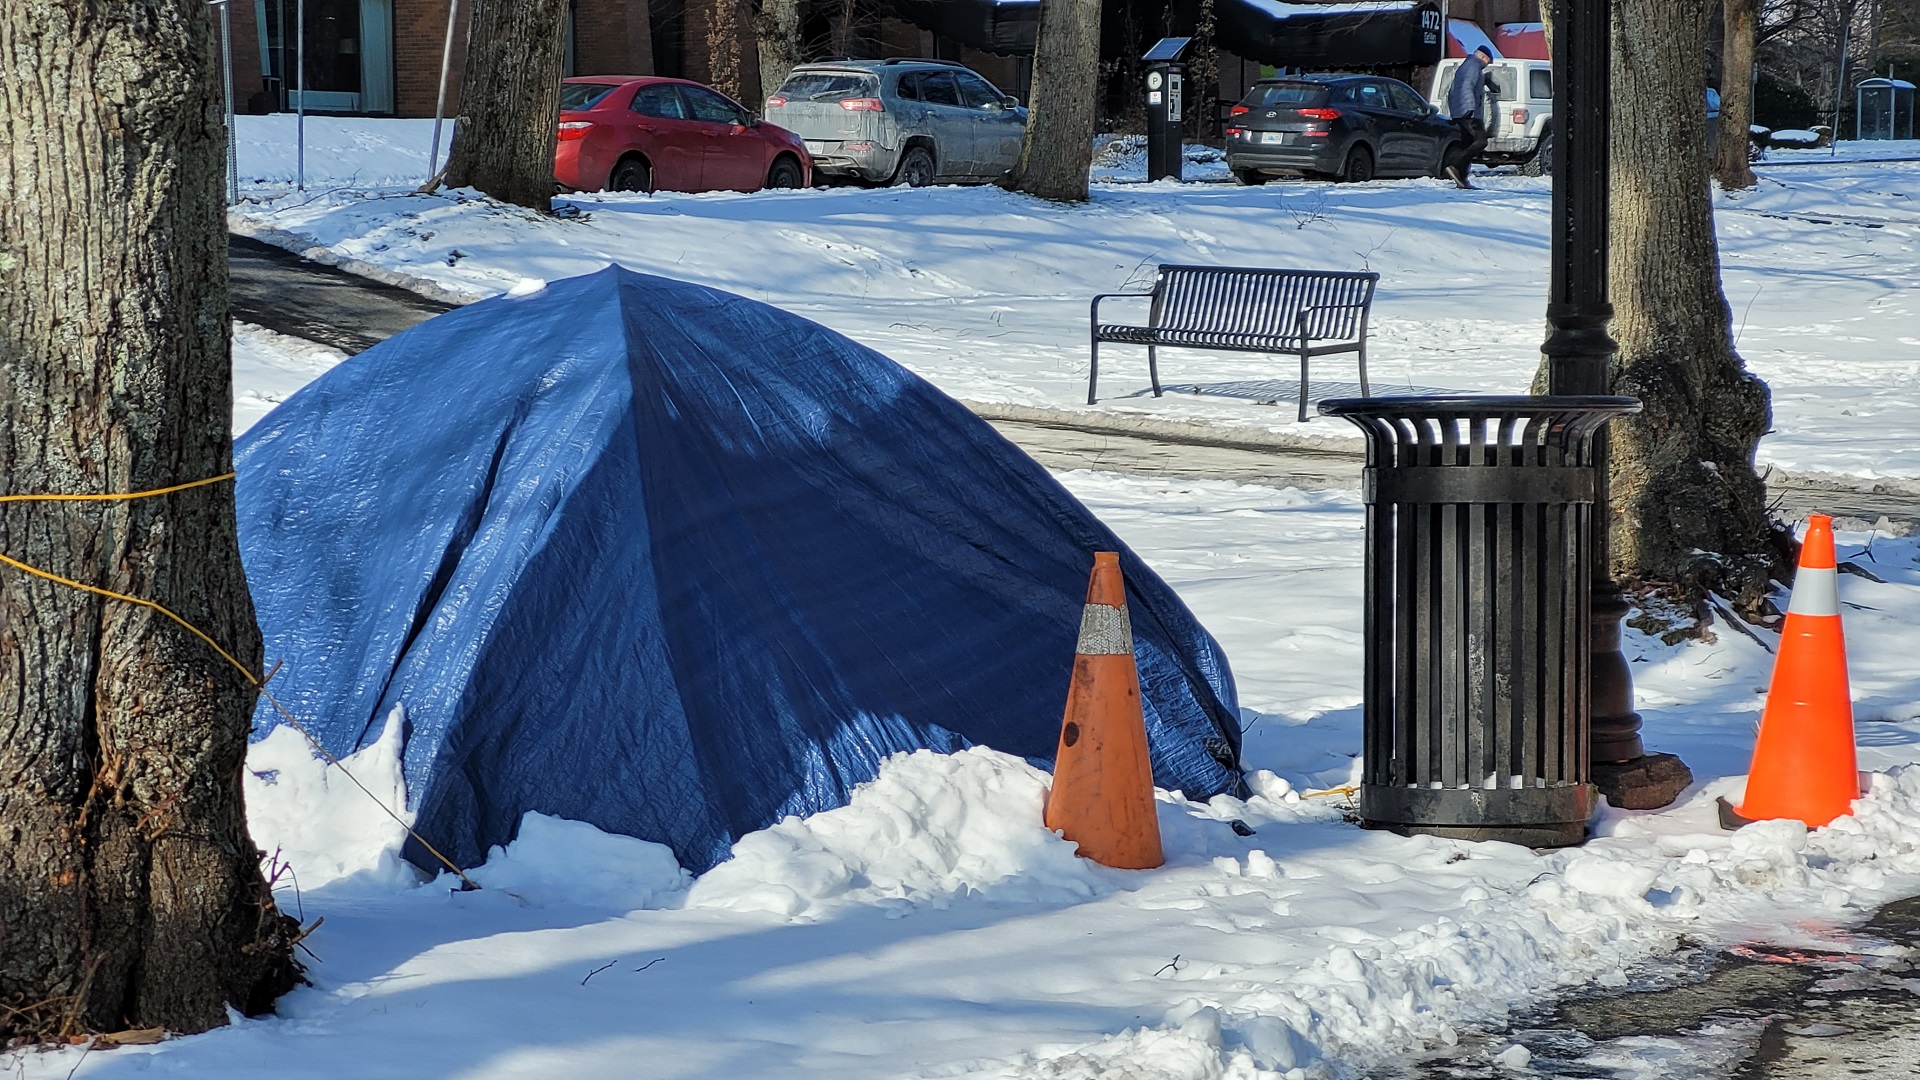 For some, a tent is the only shelter they will have when temperatures reach their lowest at night on Friday, February 3, 2023.